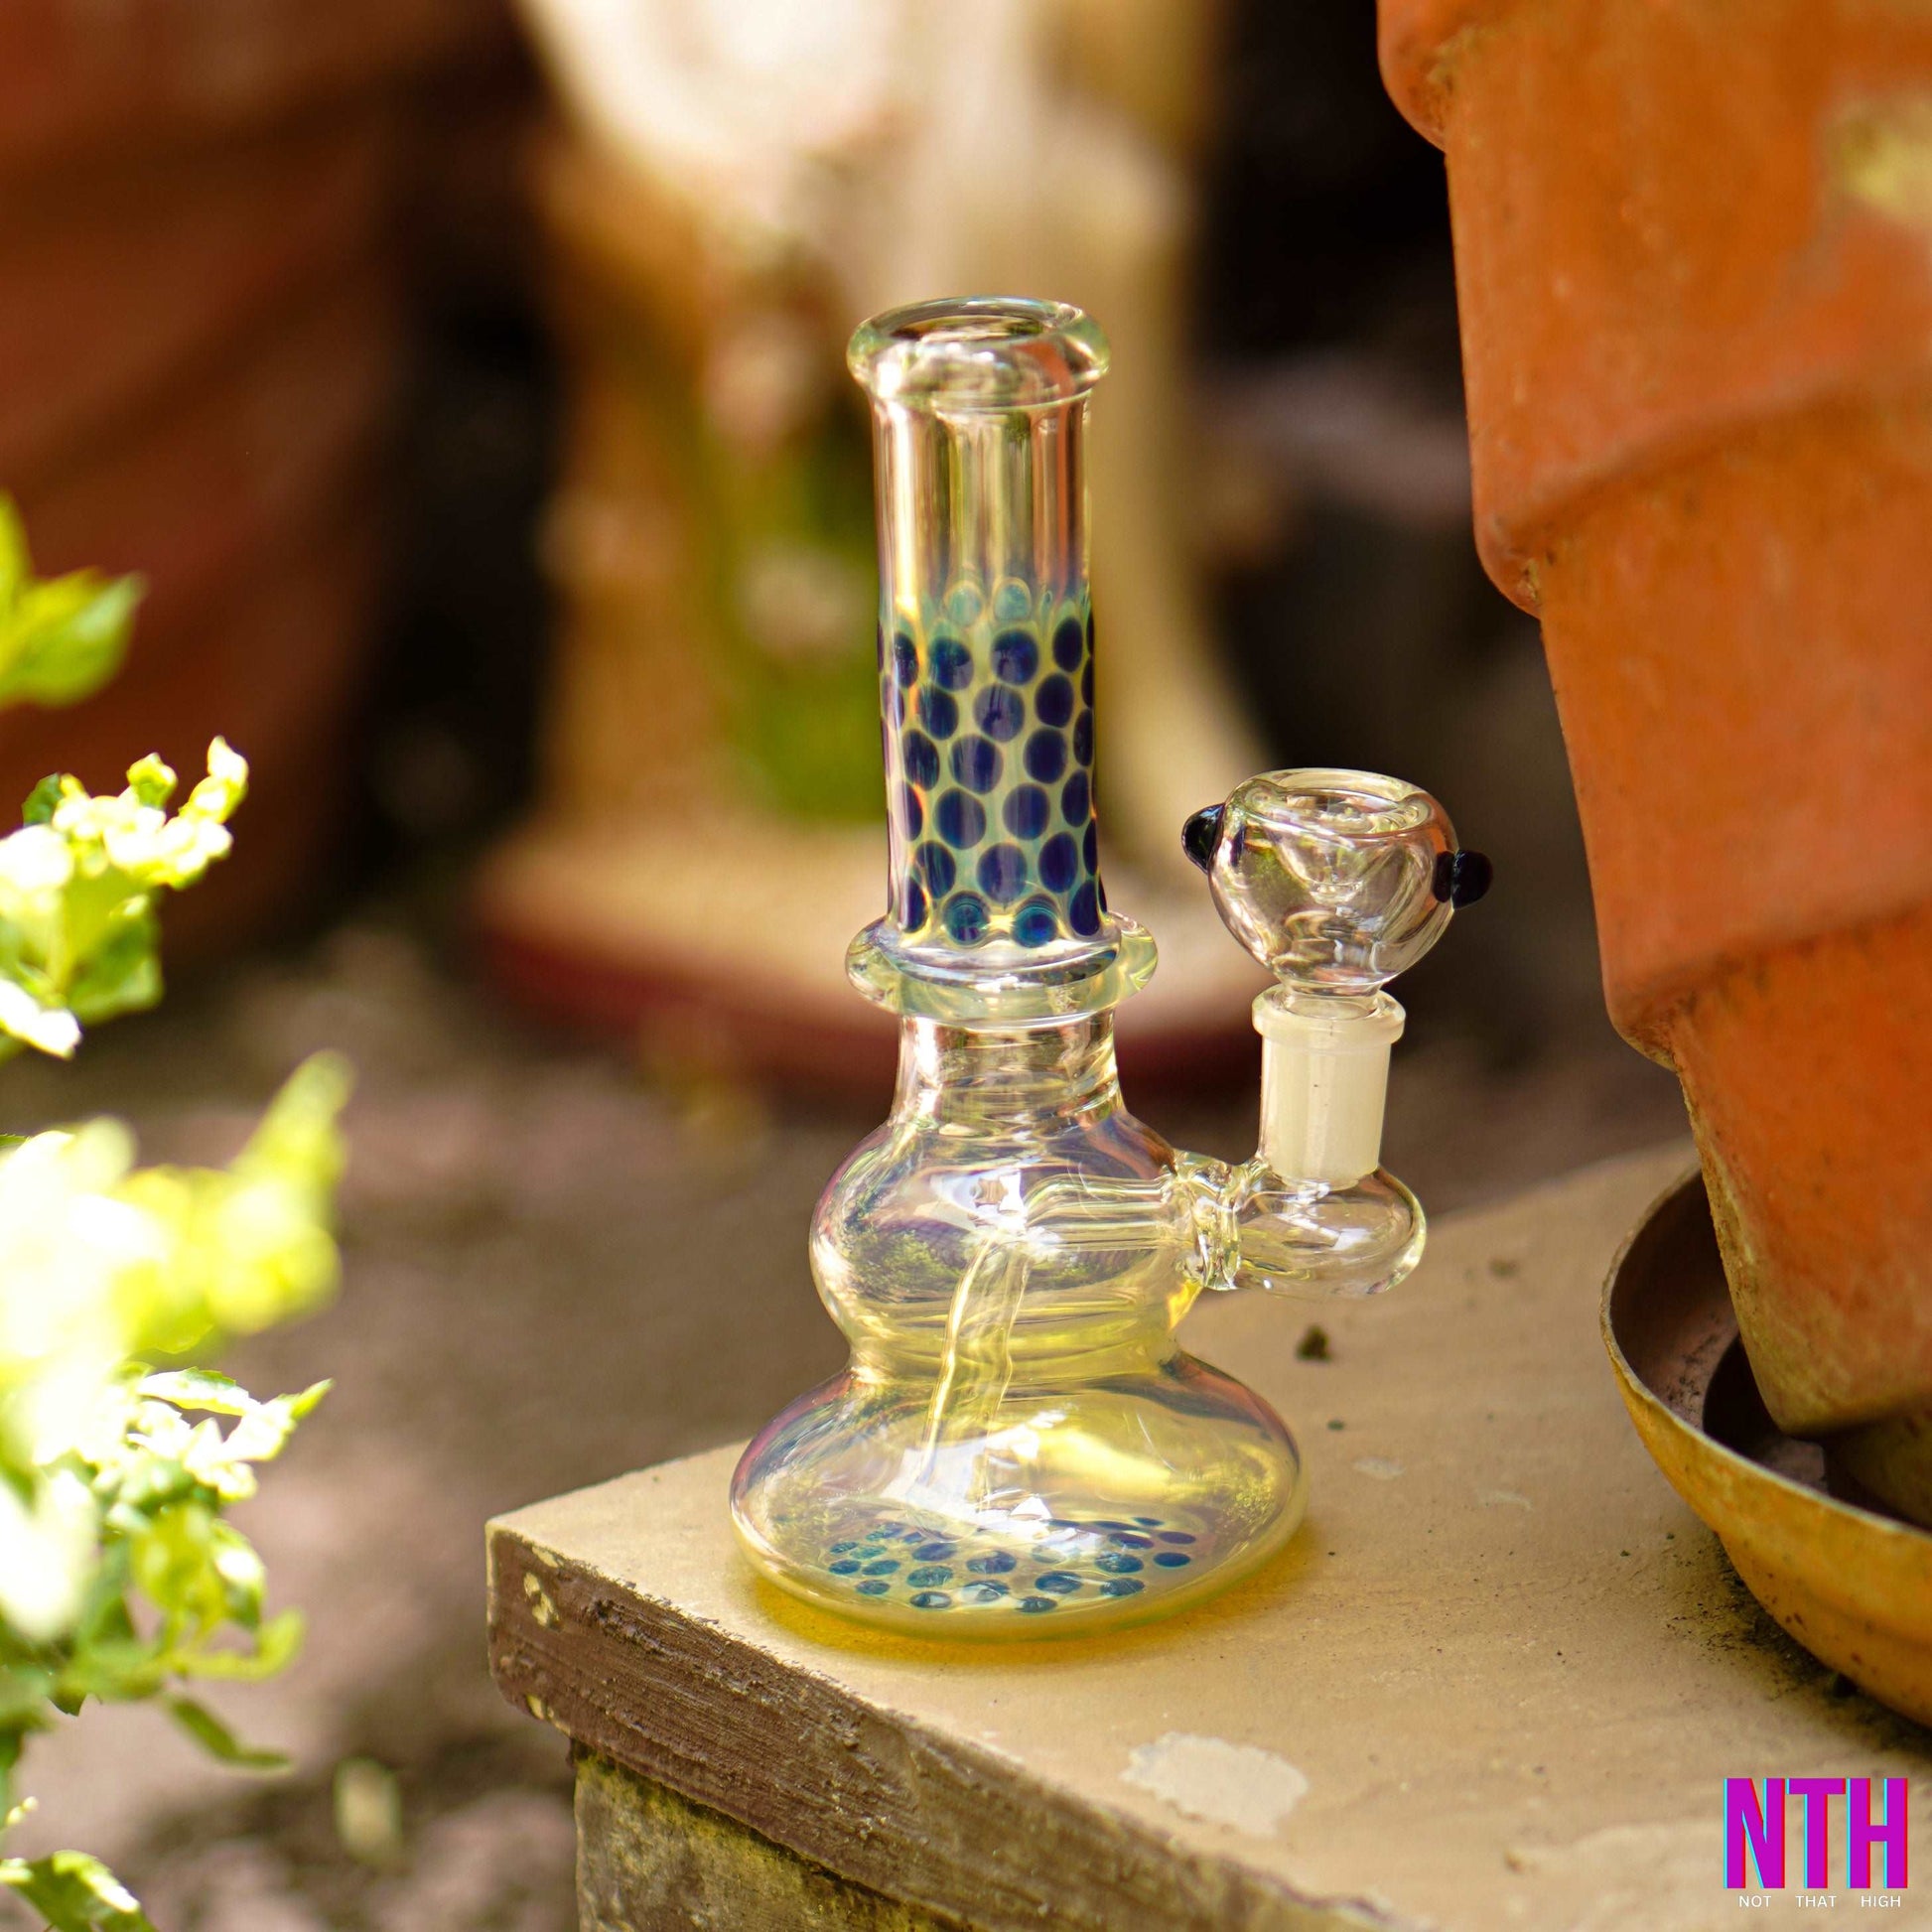 Onlybongs Snake Party Pipe | Not That High